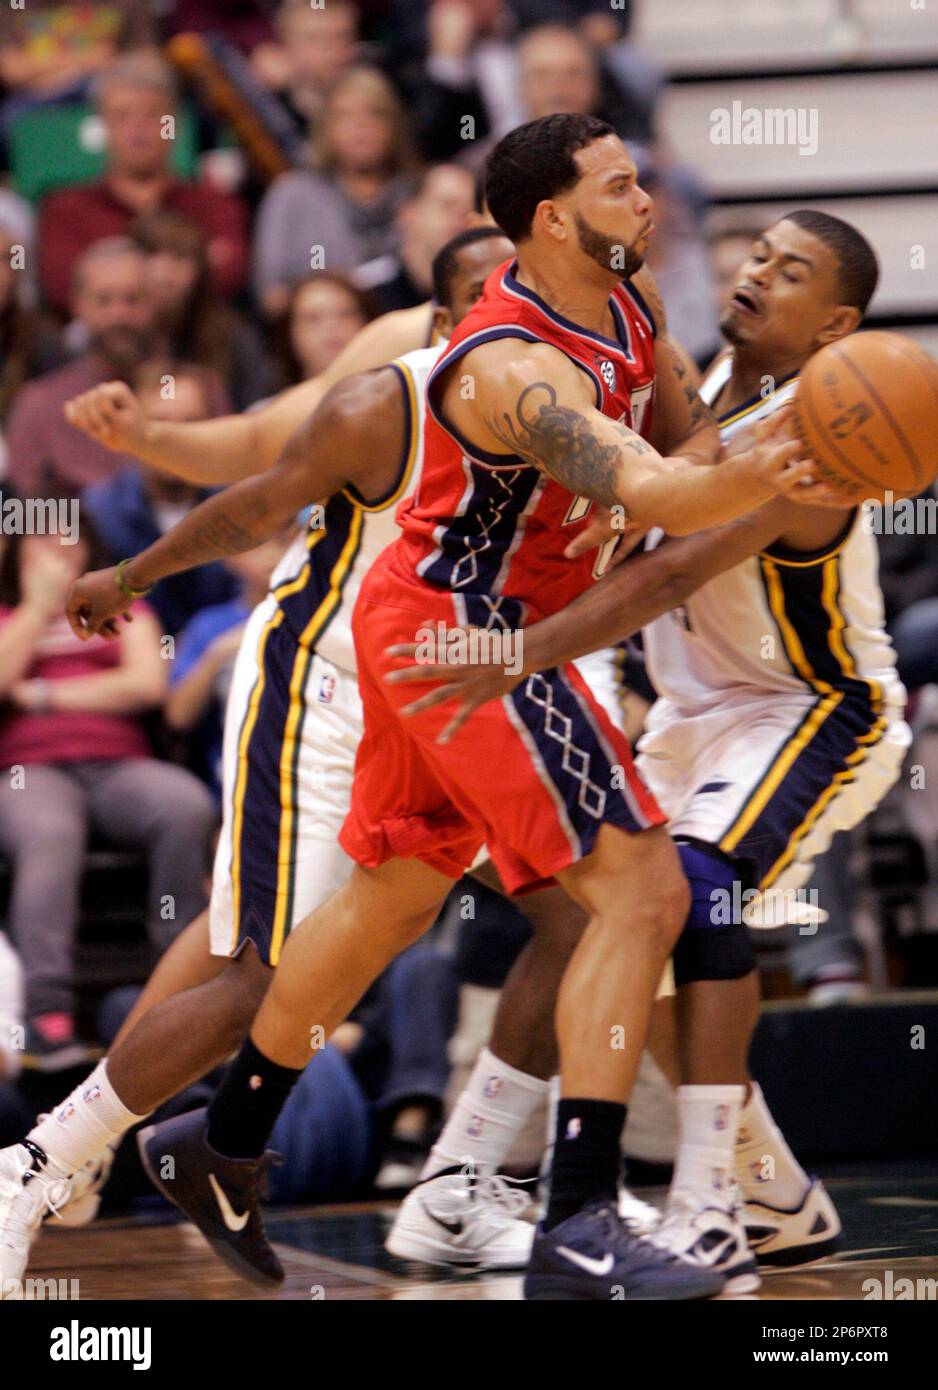 Utah Jazz player Earl Watson defends New Jersey Nets player Deron Williams  during the first half at Energy Solutions Arena in Salt Lake City, Utah on  January 14, 2012. (AP Photo/The Salt